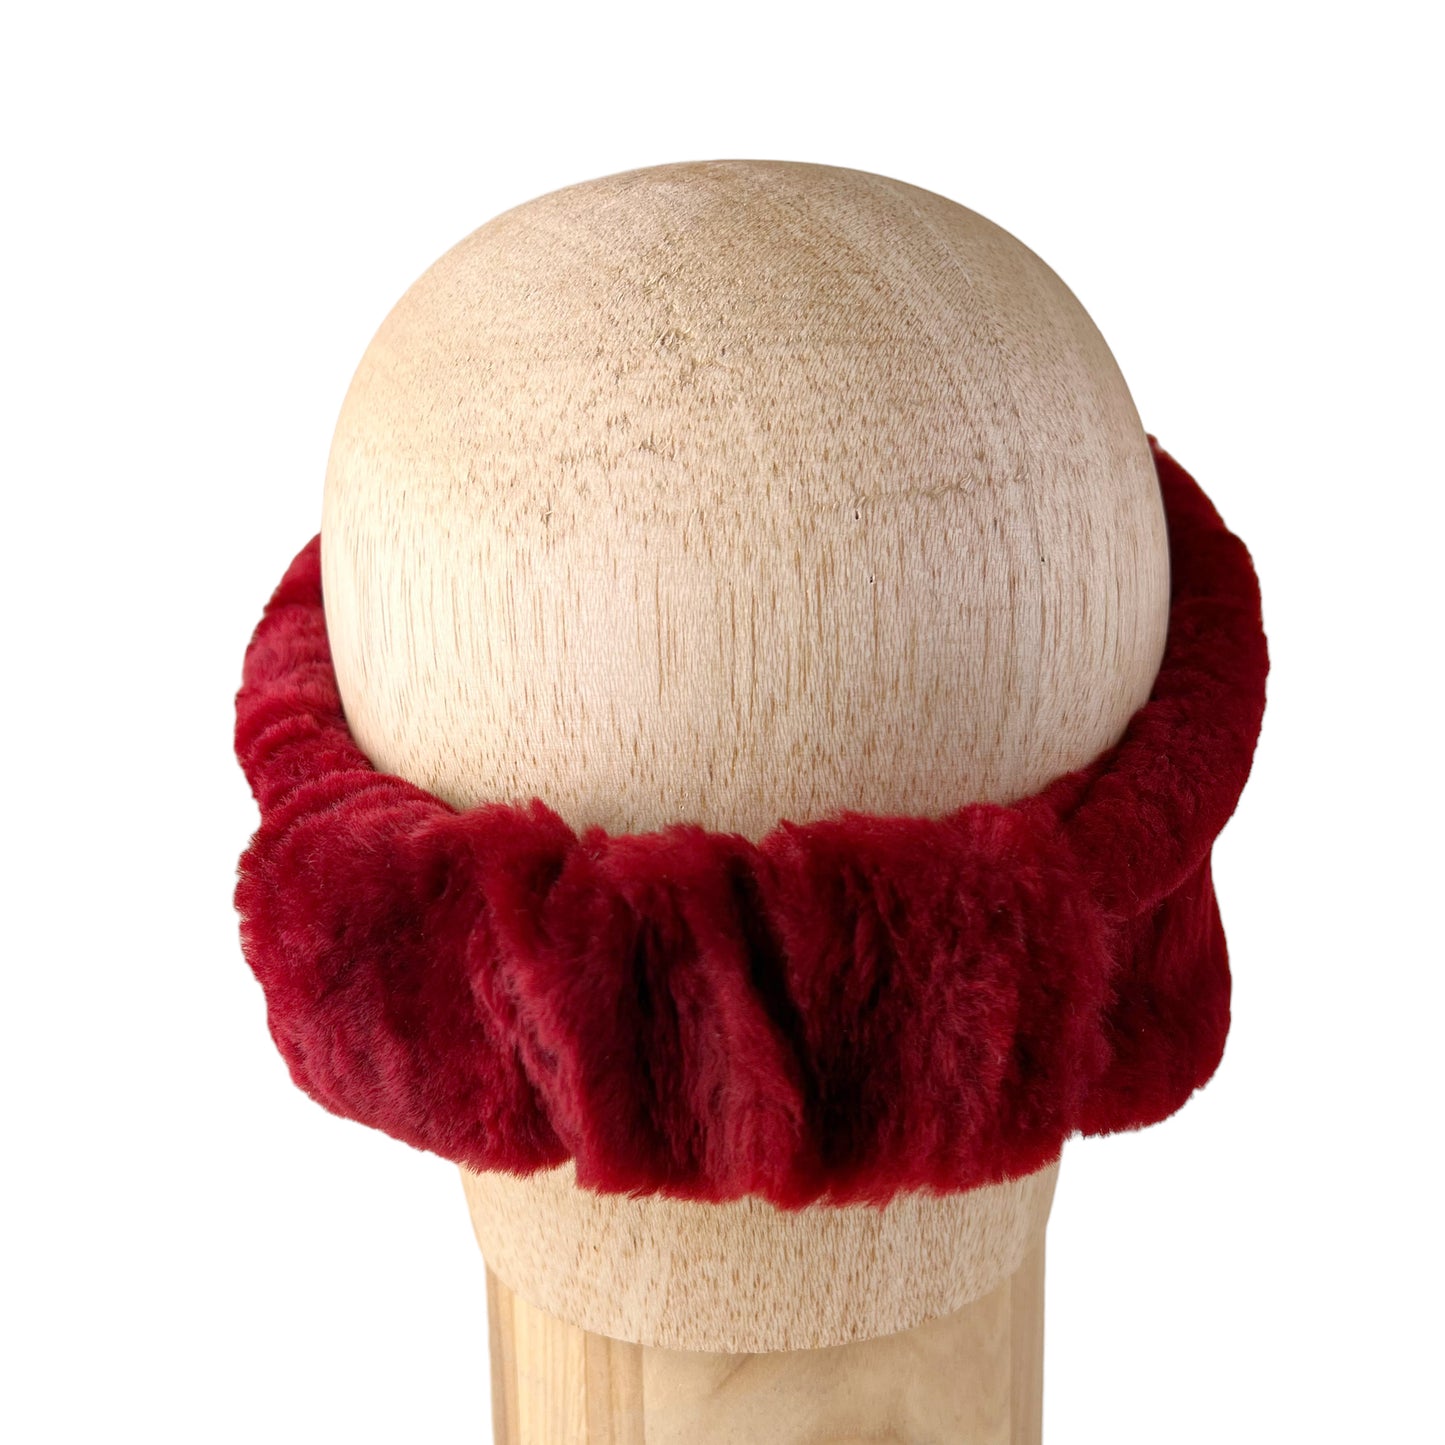 Soft Ruby Red Alpine Ear and Head Sheep Shearling Fur Band